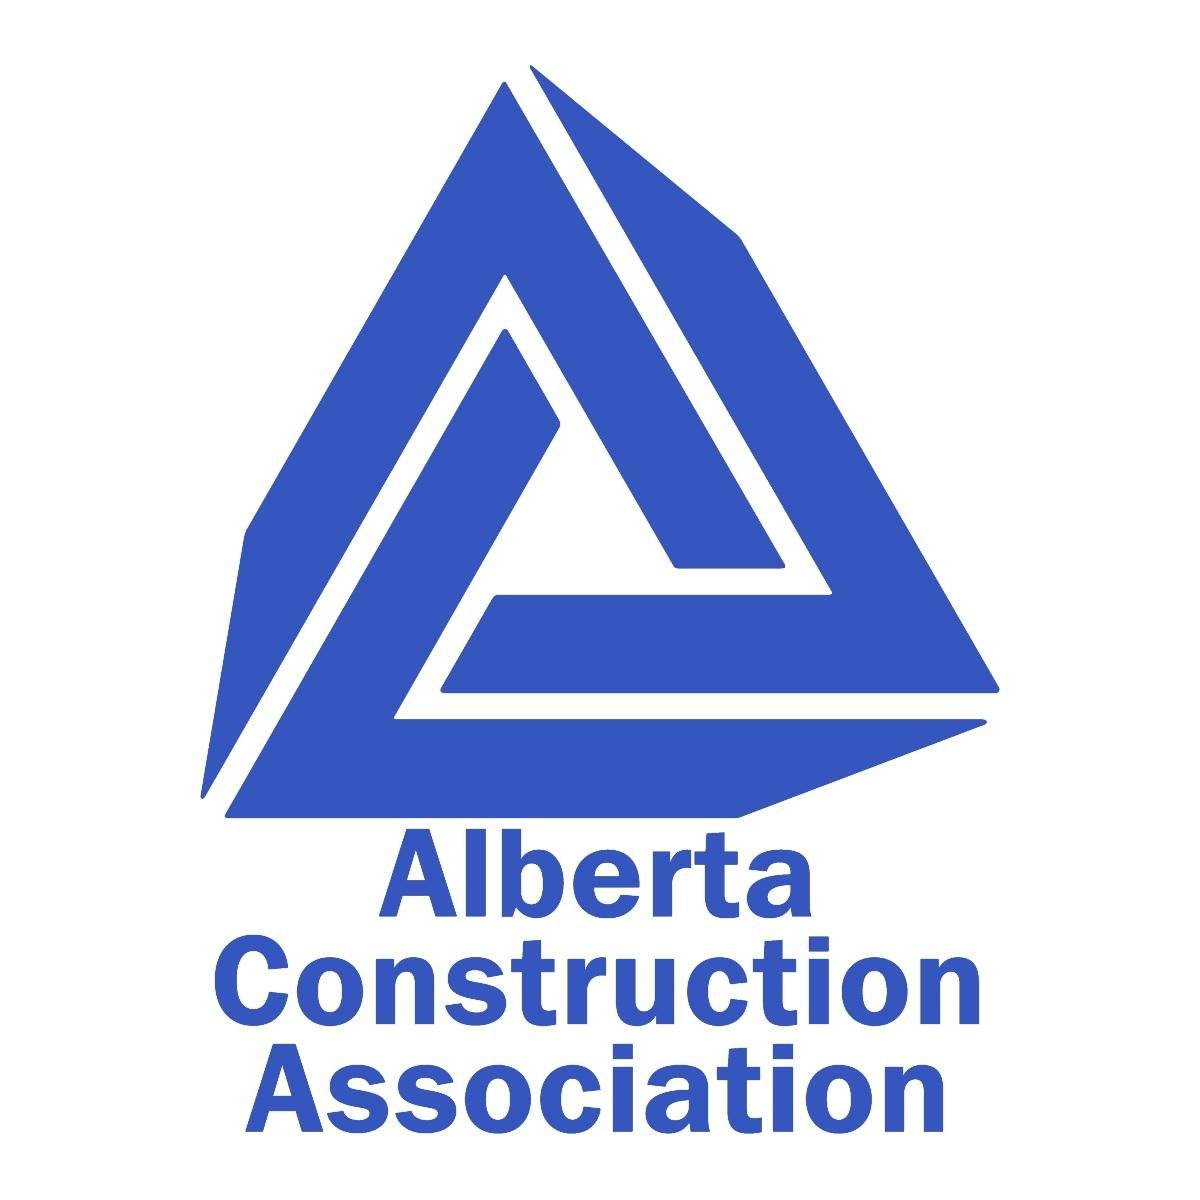 The ACA leads Alberta’s non-residential construction industry through advocacy, industry standard practices, and promotion of a skilled workforce.